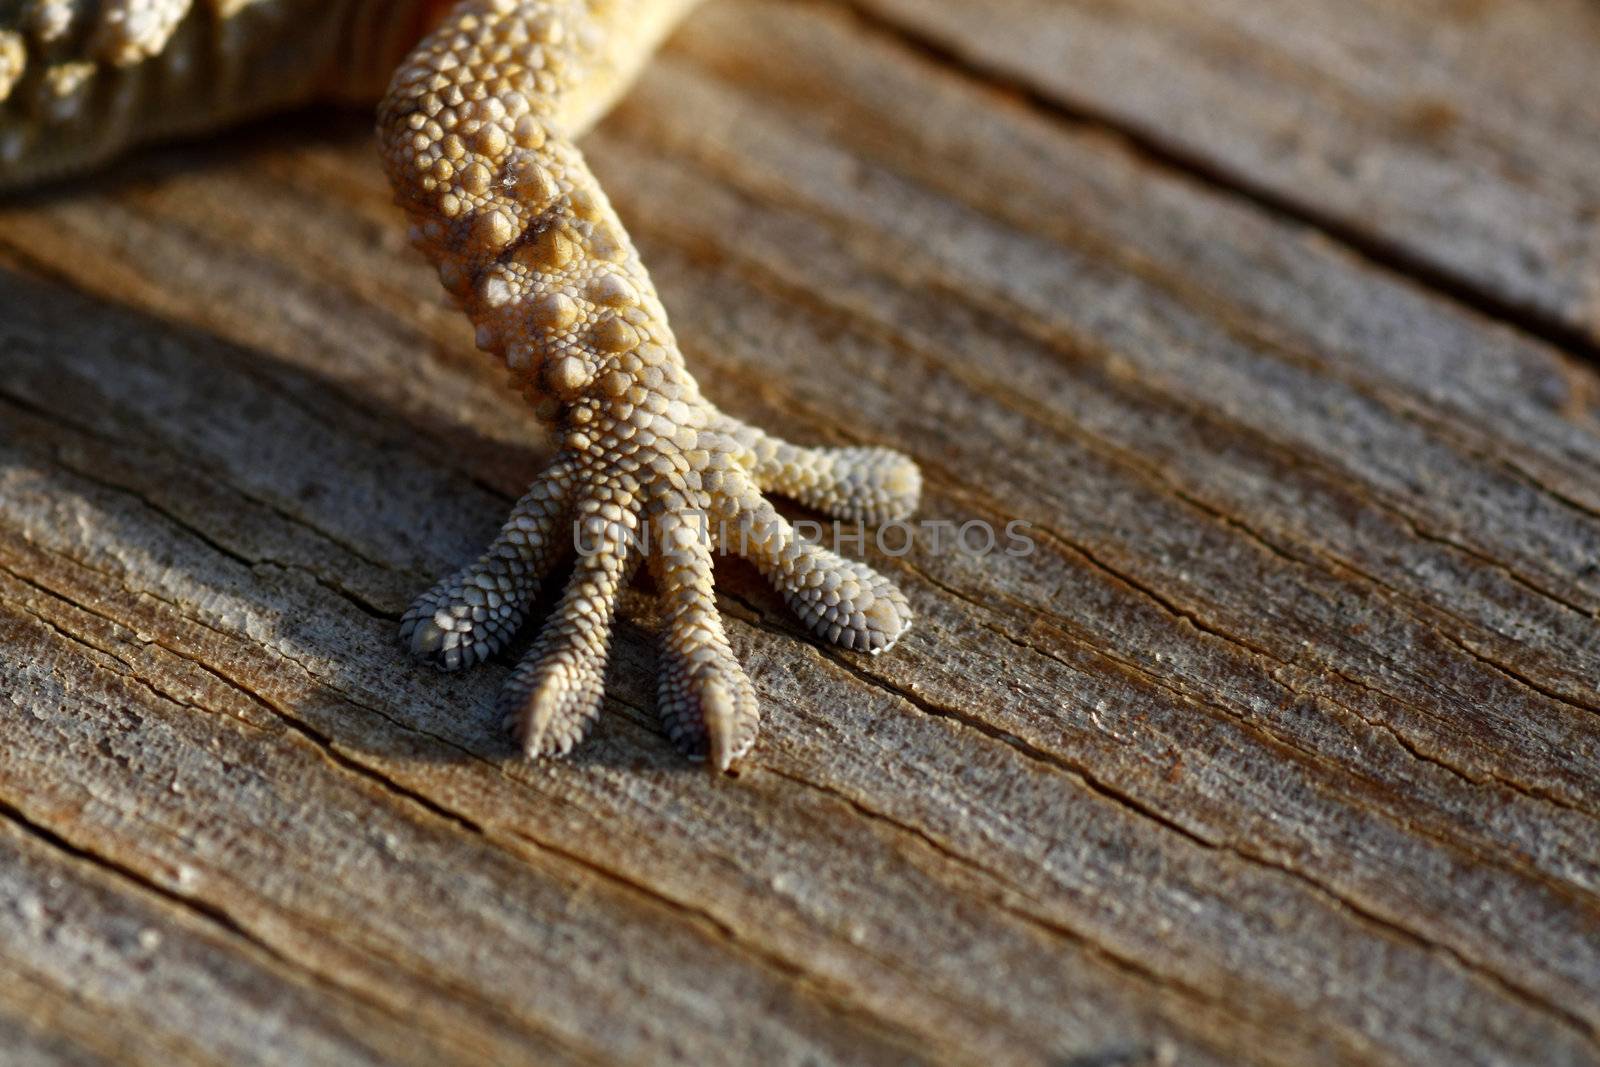 Close up view of the leg and foot of a European gecko.